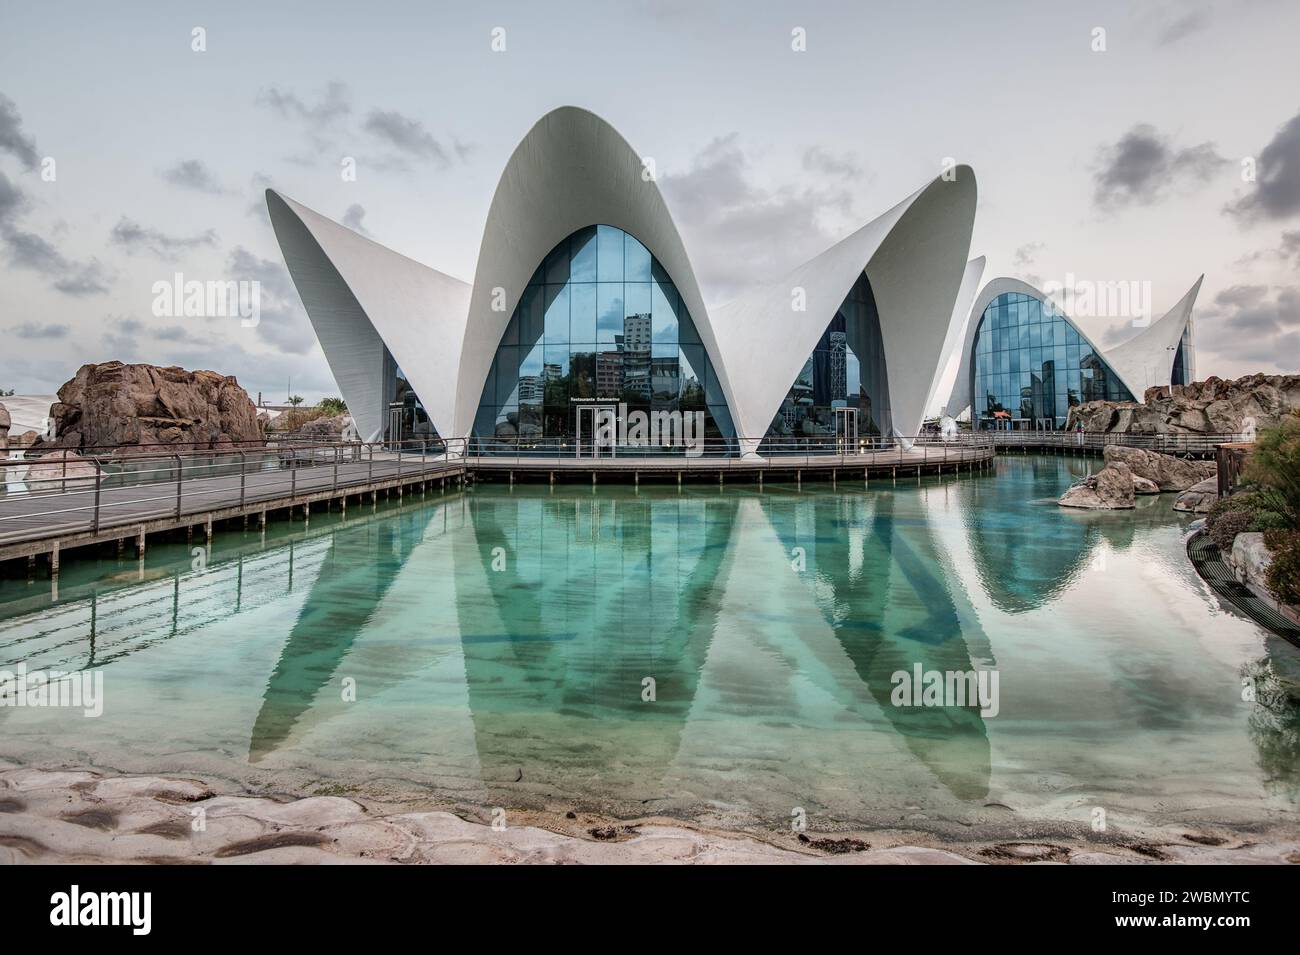 The modern Submarino restaurant inside the Oceanographic Museum with its architecture reflected in the water, Valencia, Spain Stock Photo